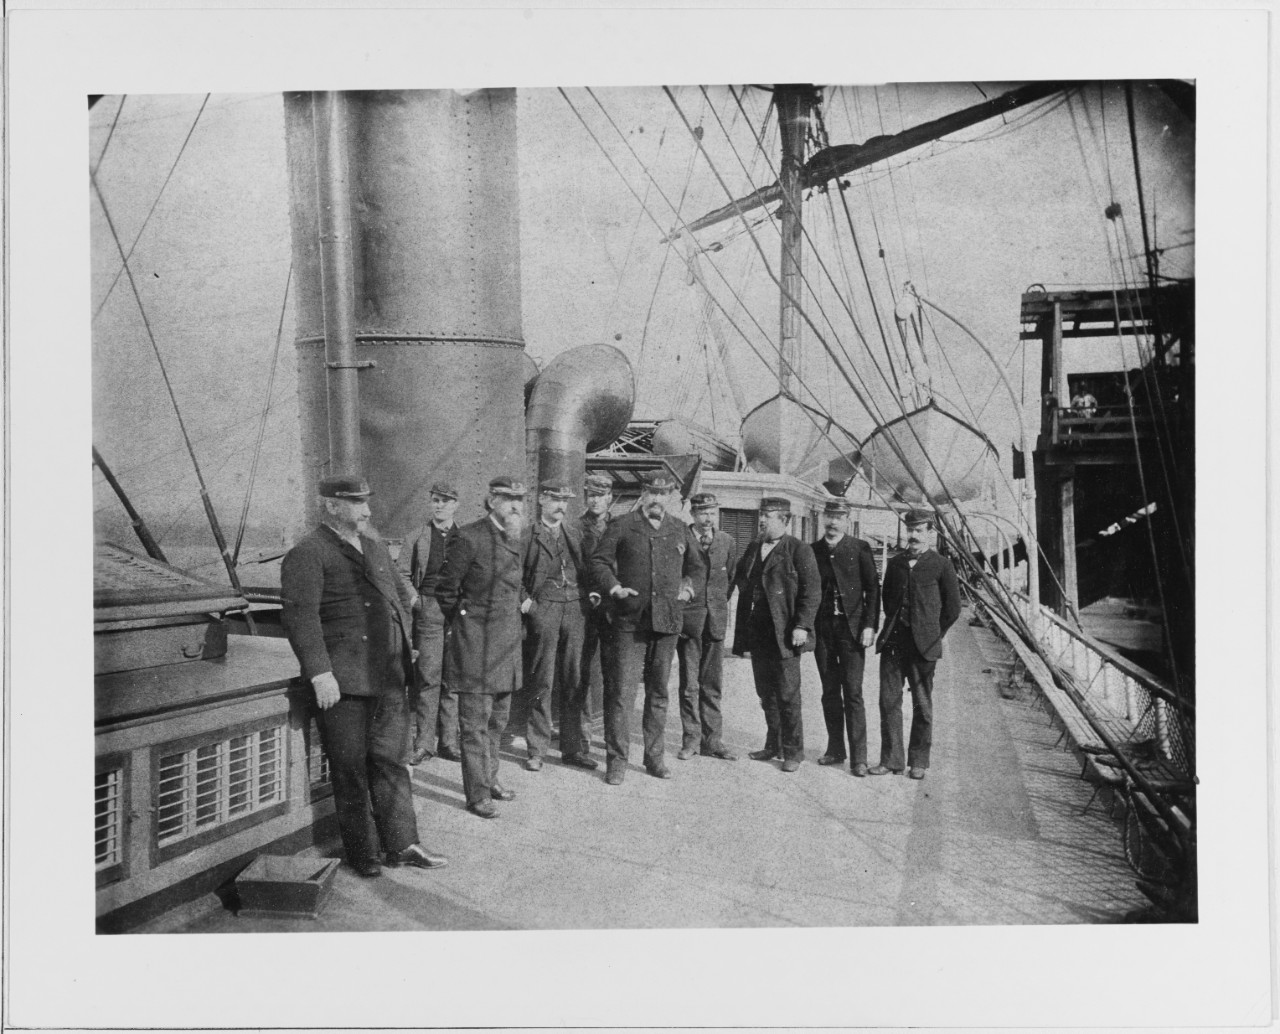 Men of the old Navy about 1887